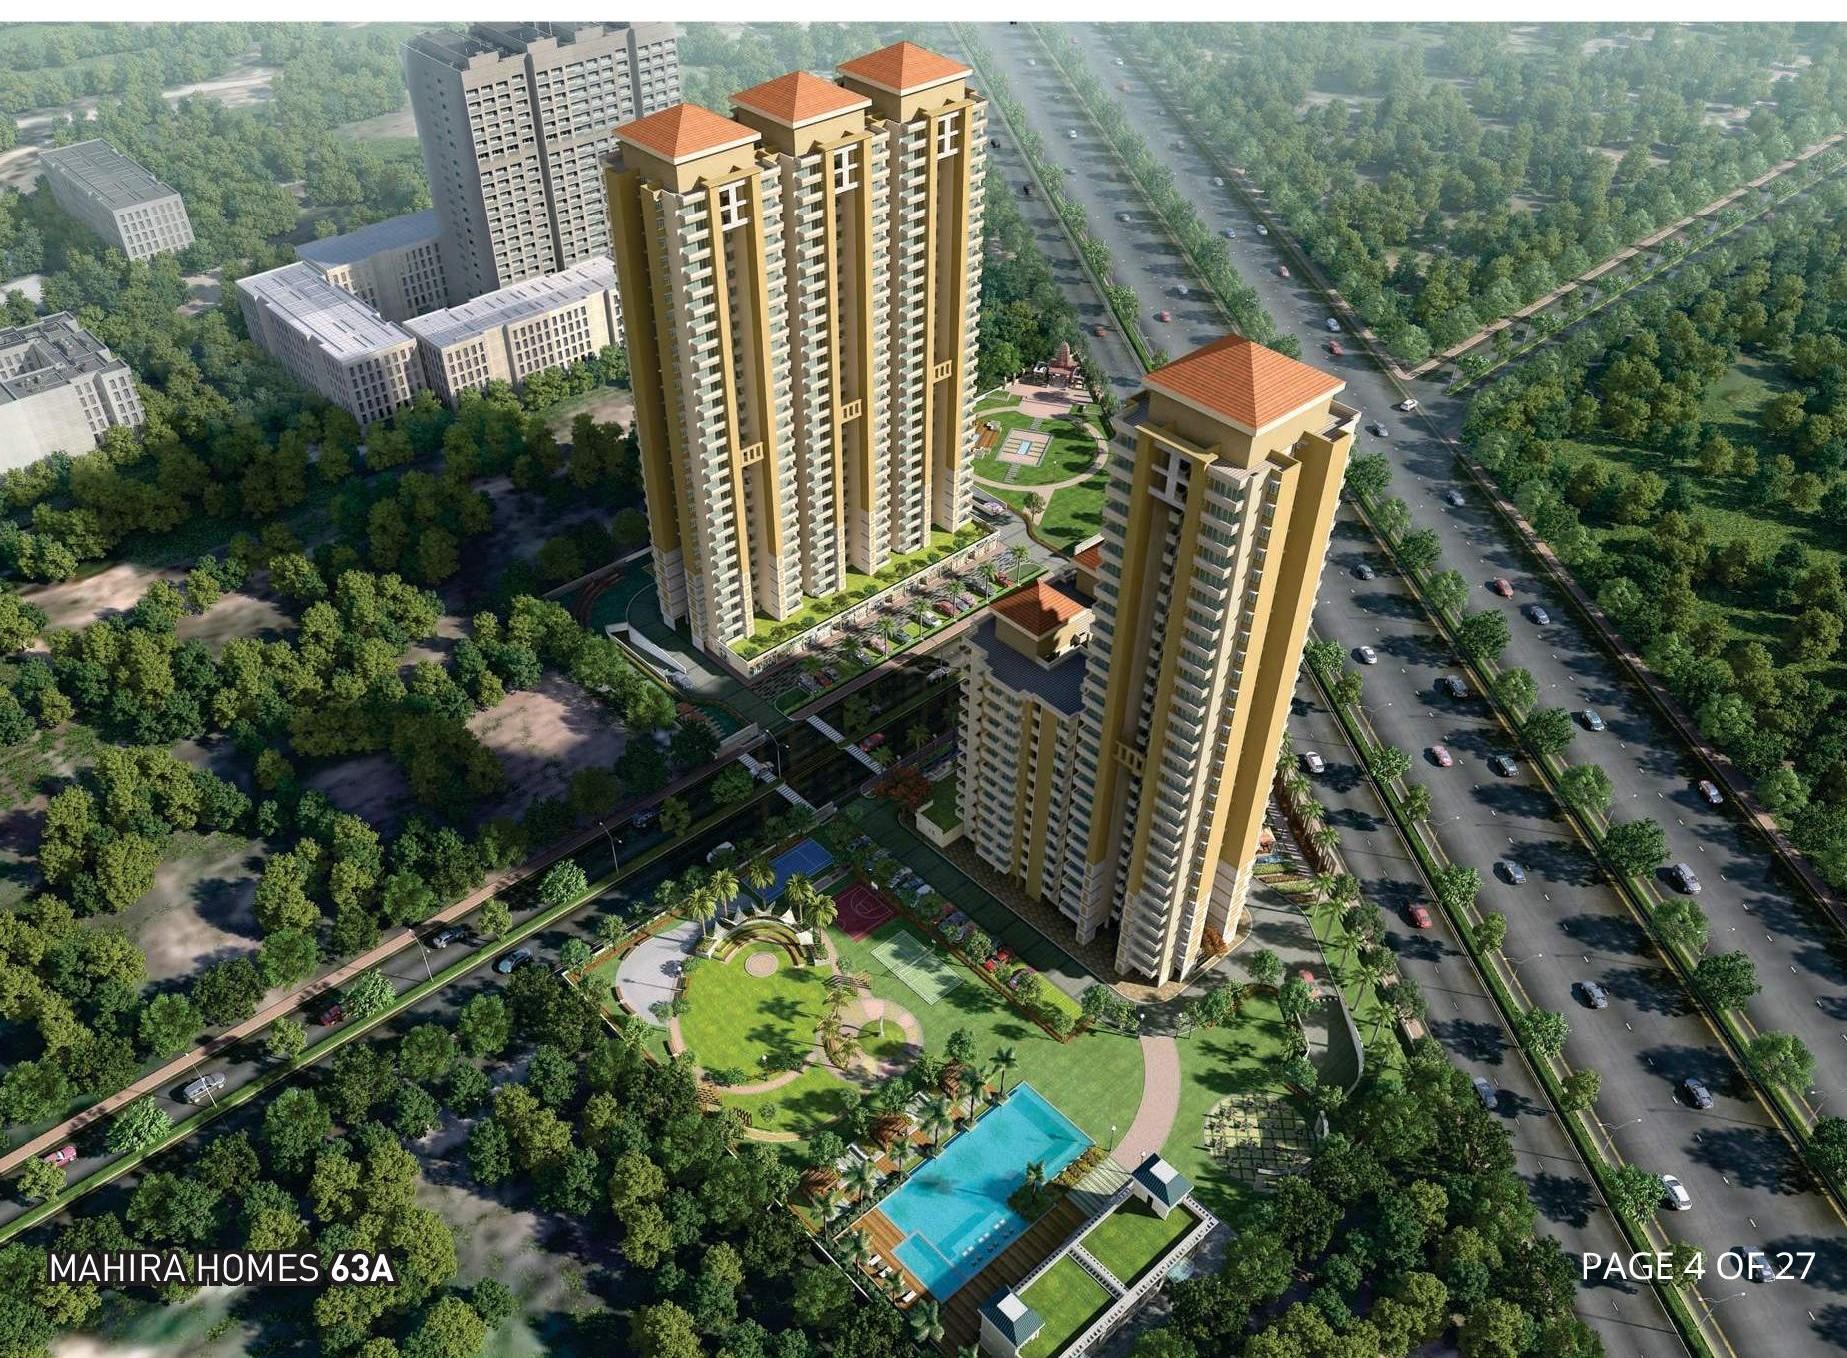 Mahira homes sector 63a is new affordable housing project in Gurgaon